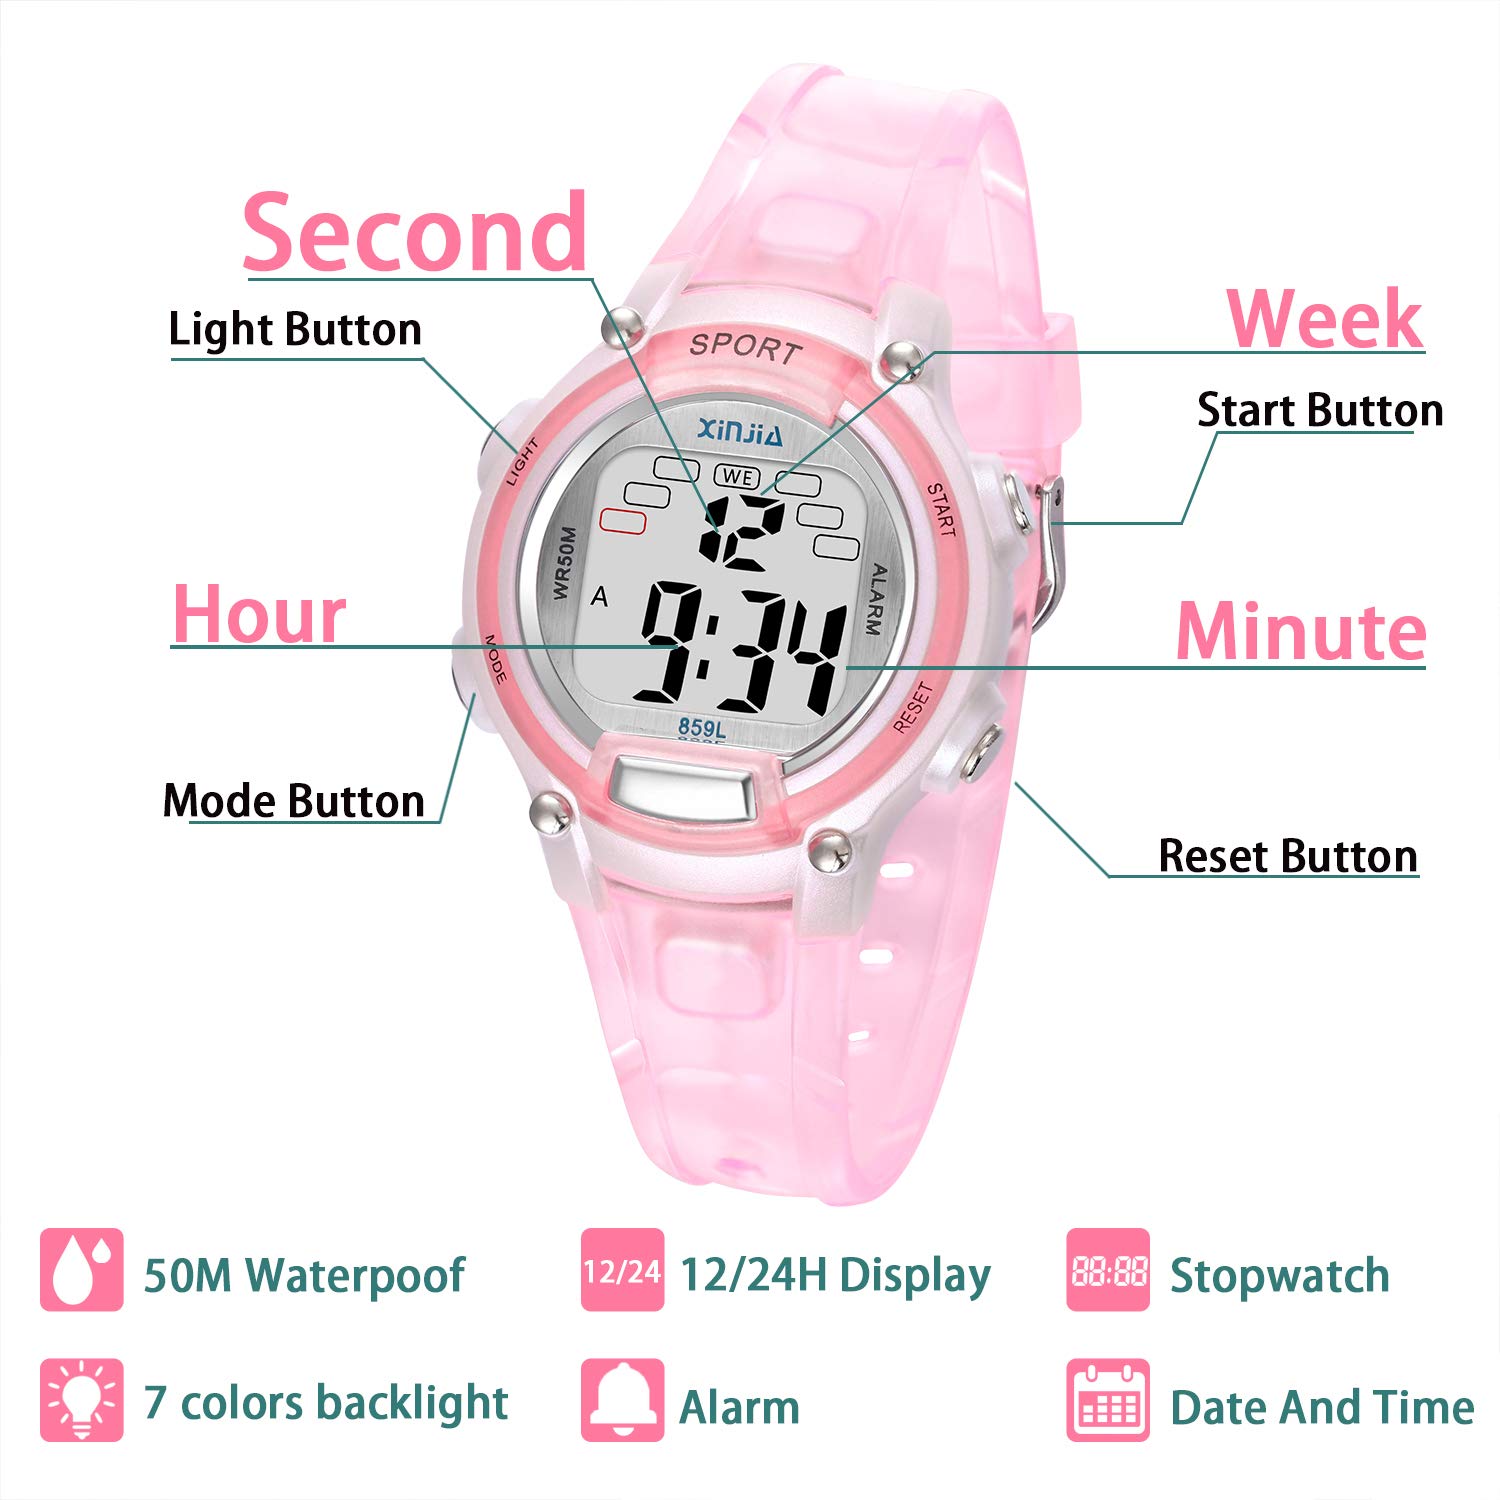 Edillas Kids Digital Watches for Girls Boys,7 Colors LED Flashing Waterproof Wrist Watches for Boys Girls Child Sport Outdoor Multifunctional Wrist Watches with Stopwatch/Alarm for Ages 5-14